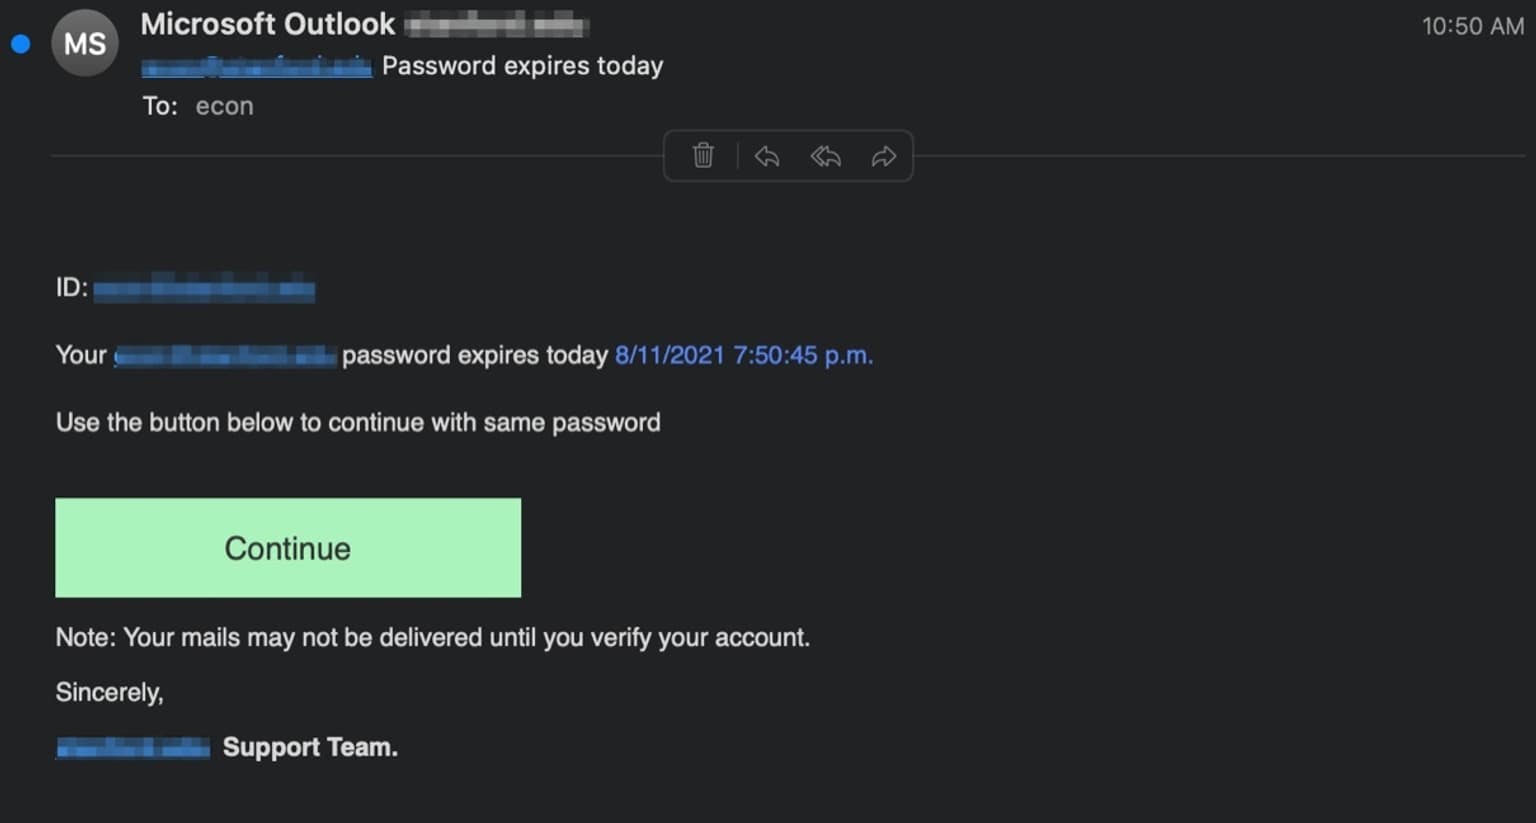 university support email phishing attempt